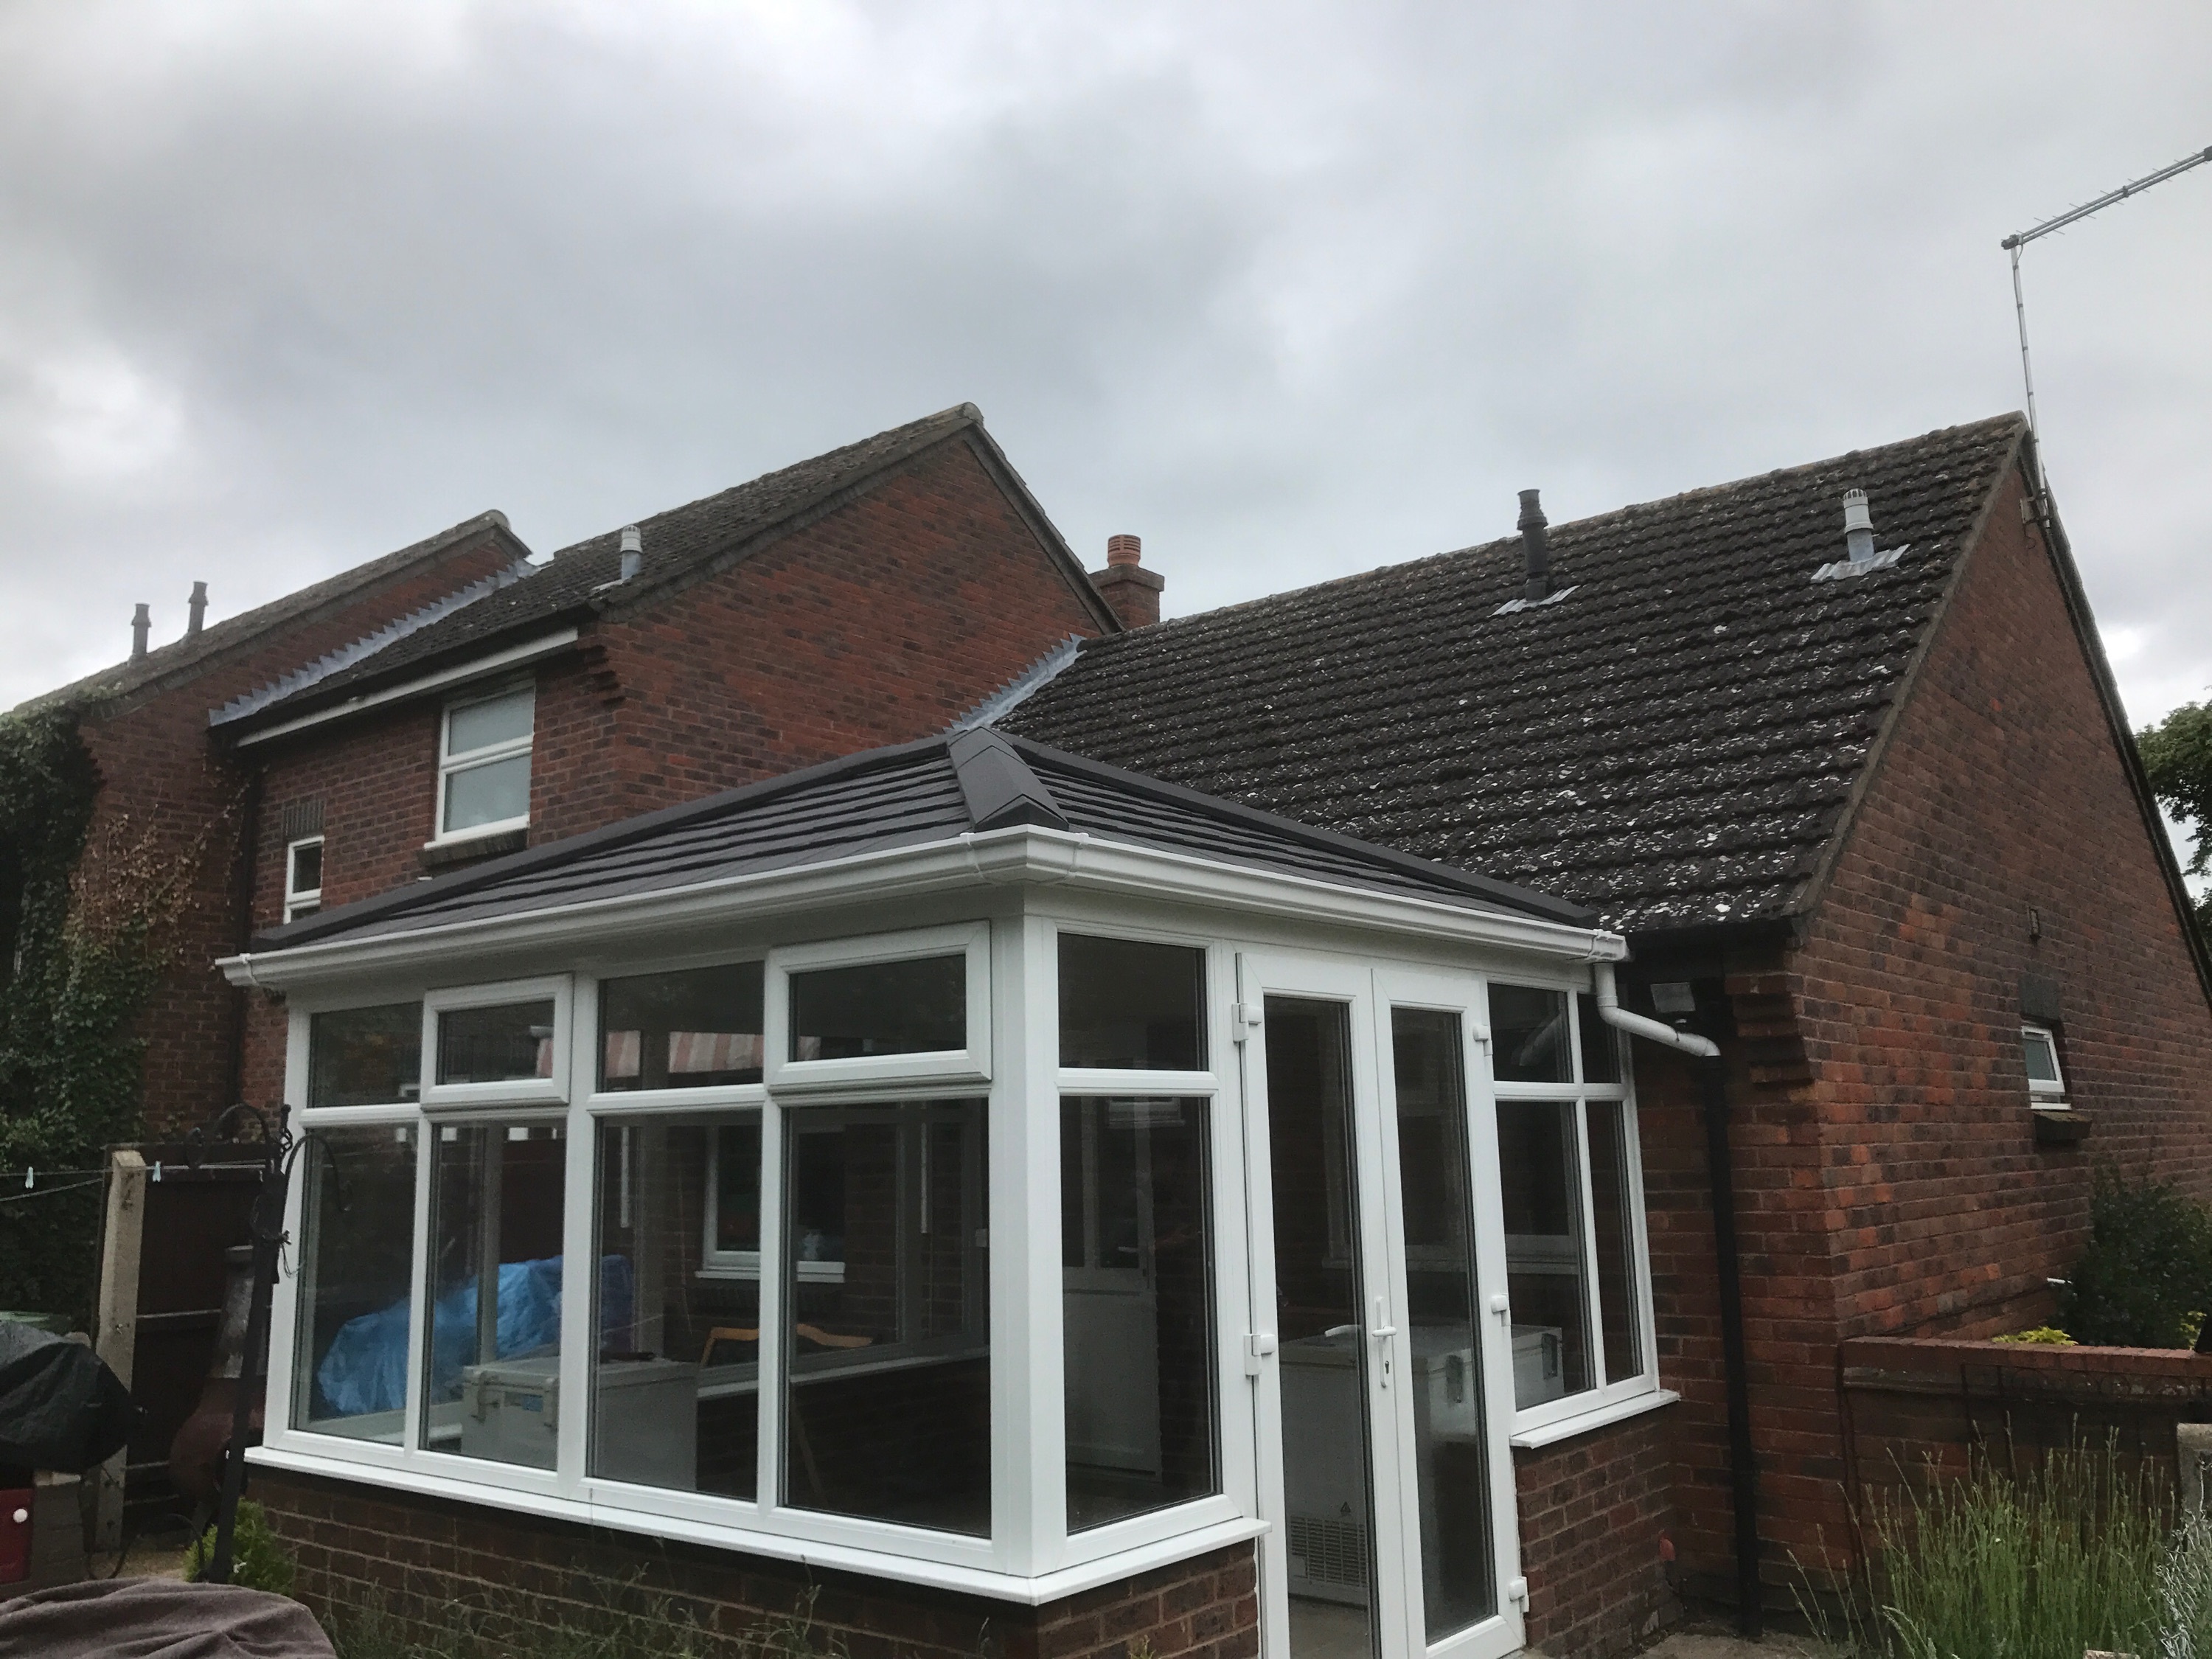 Conservatory after a Tiled Conservatory Roof transformation